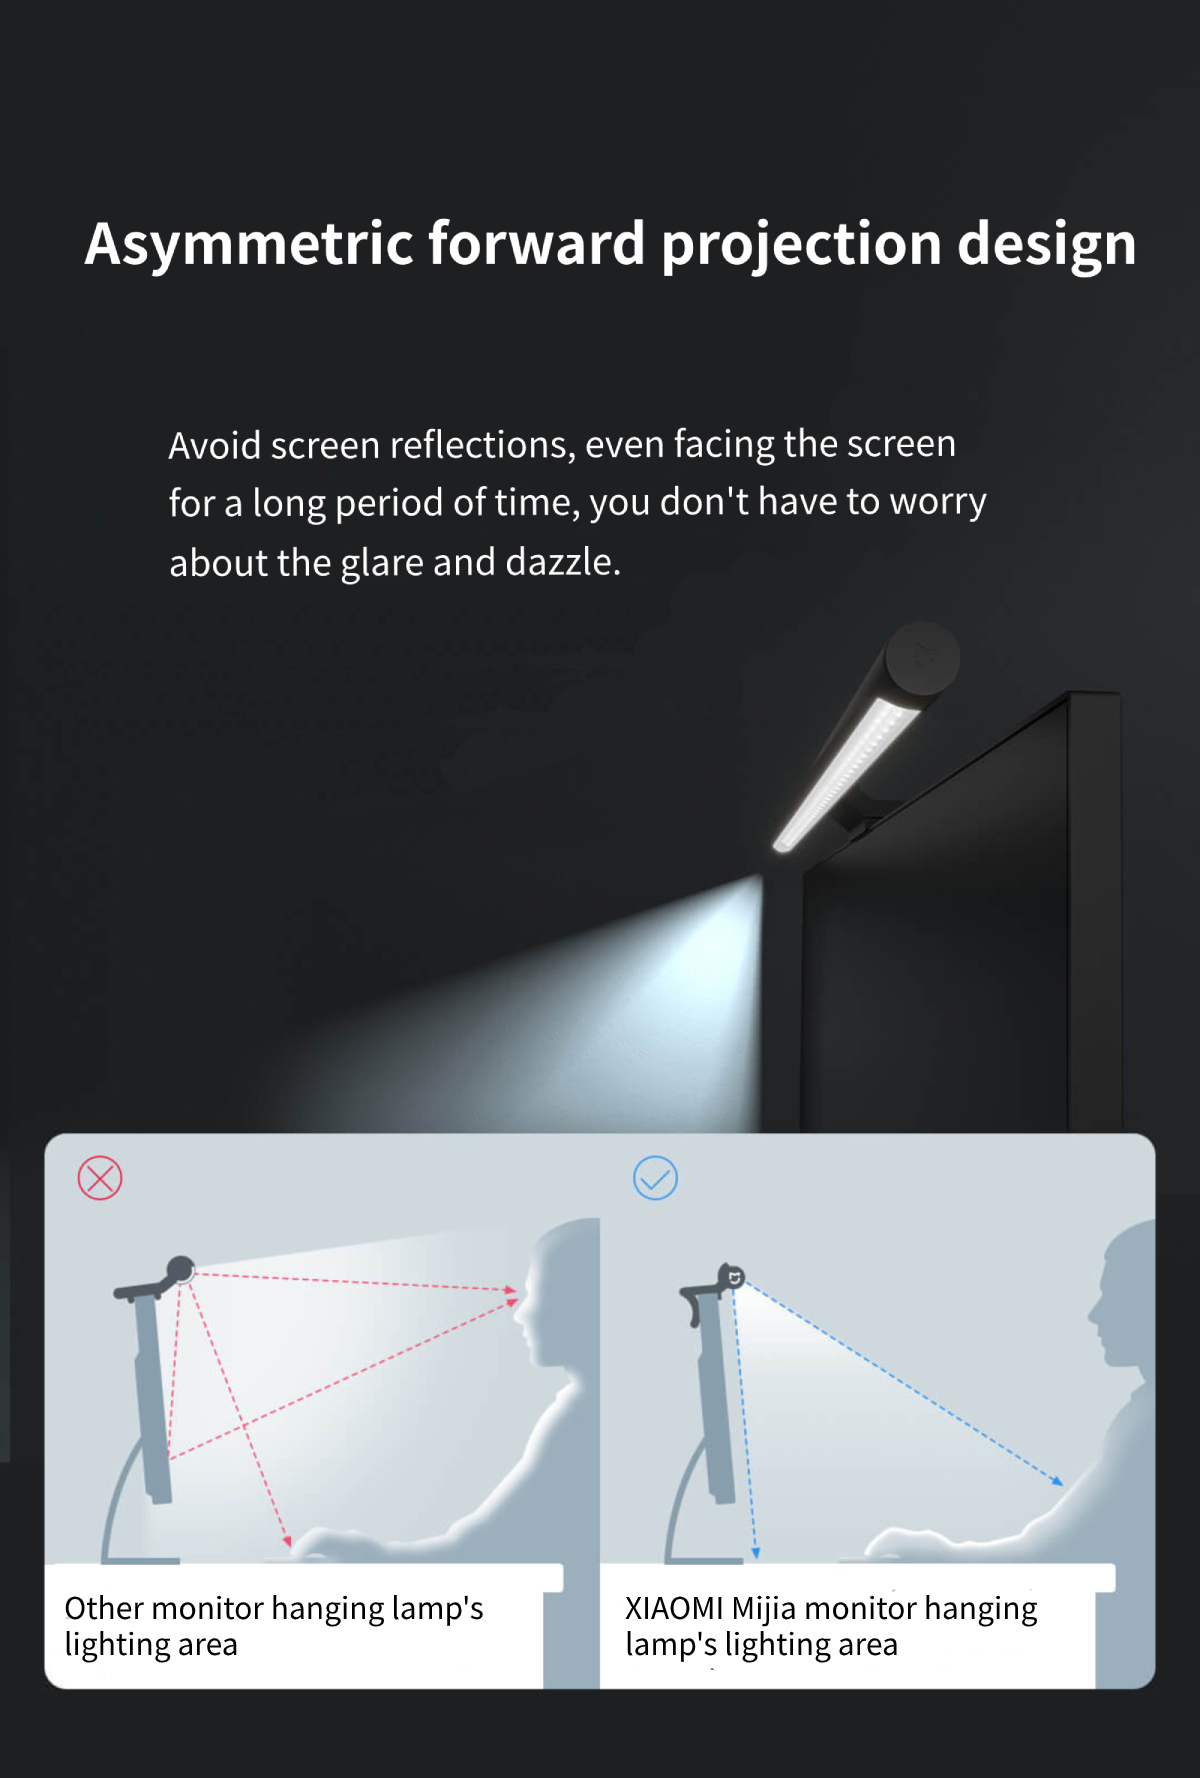 XIAOMI Mi Computer Monitor Light Bar 2.4GHz wireless Remote Control No Screen Reflection Eyes Protection Ra95 USB Lamp Display Hanging Light